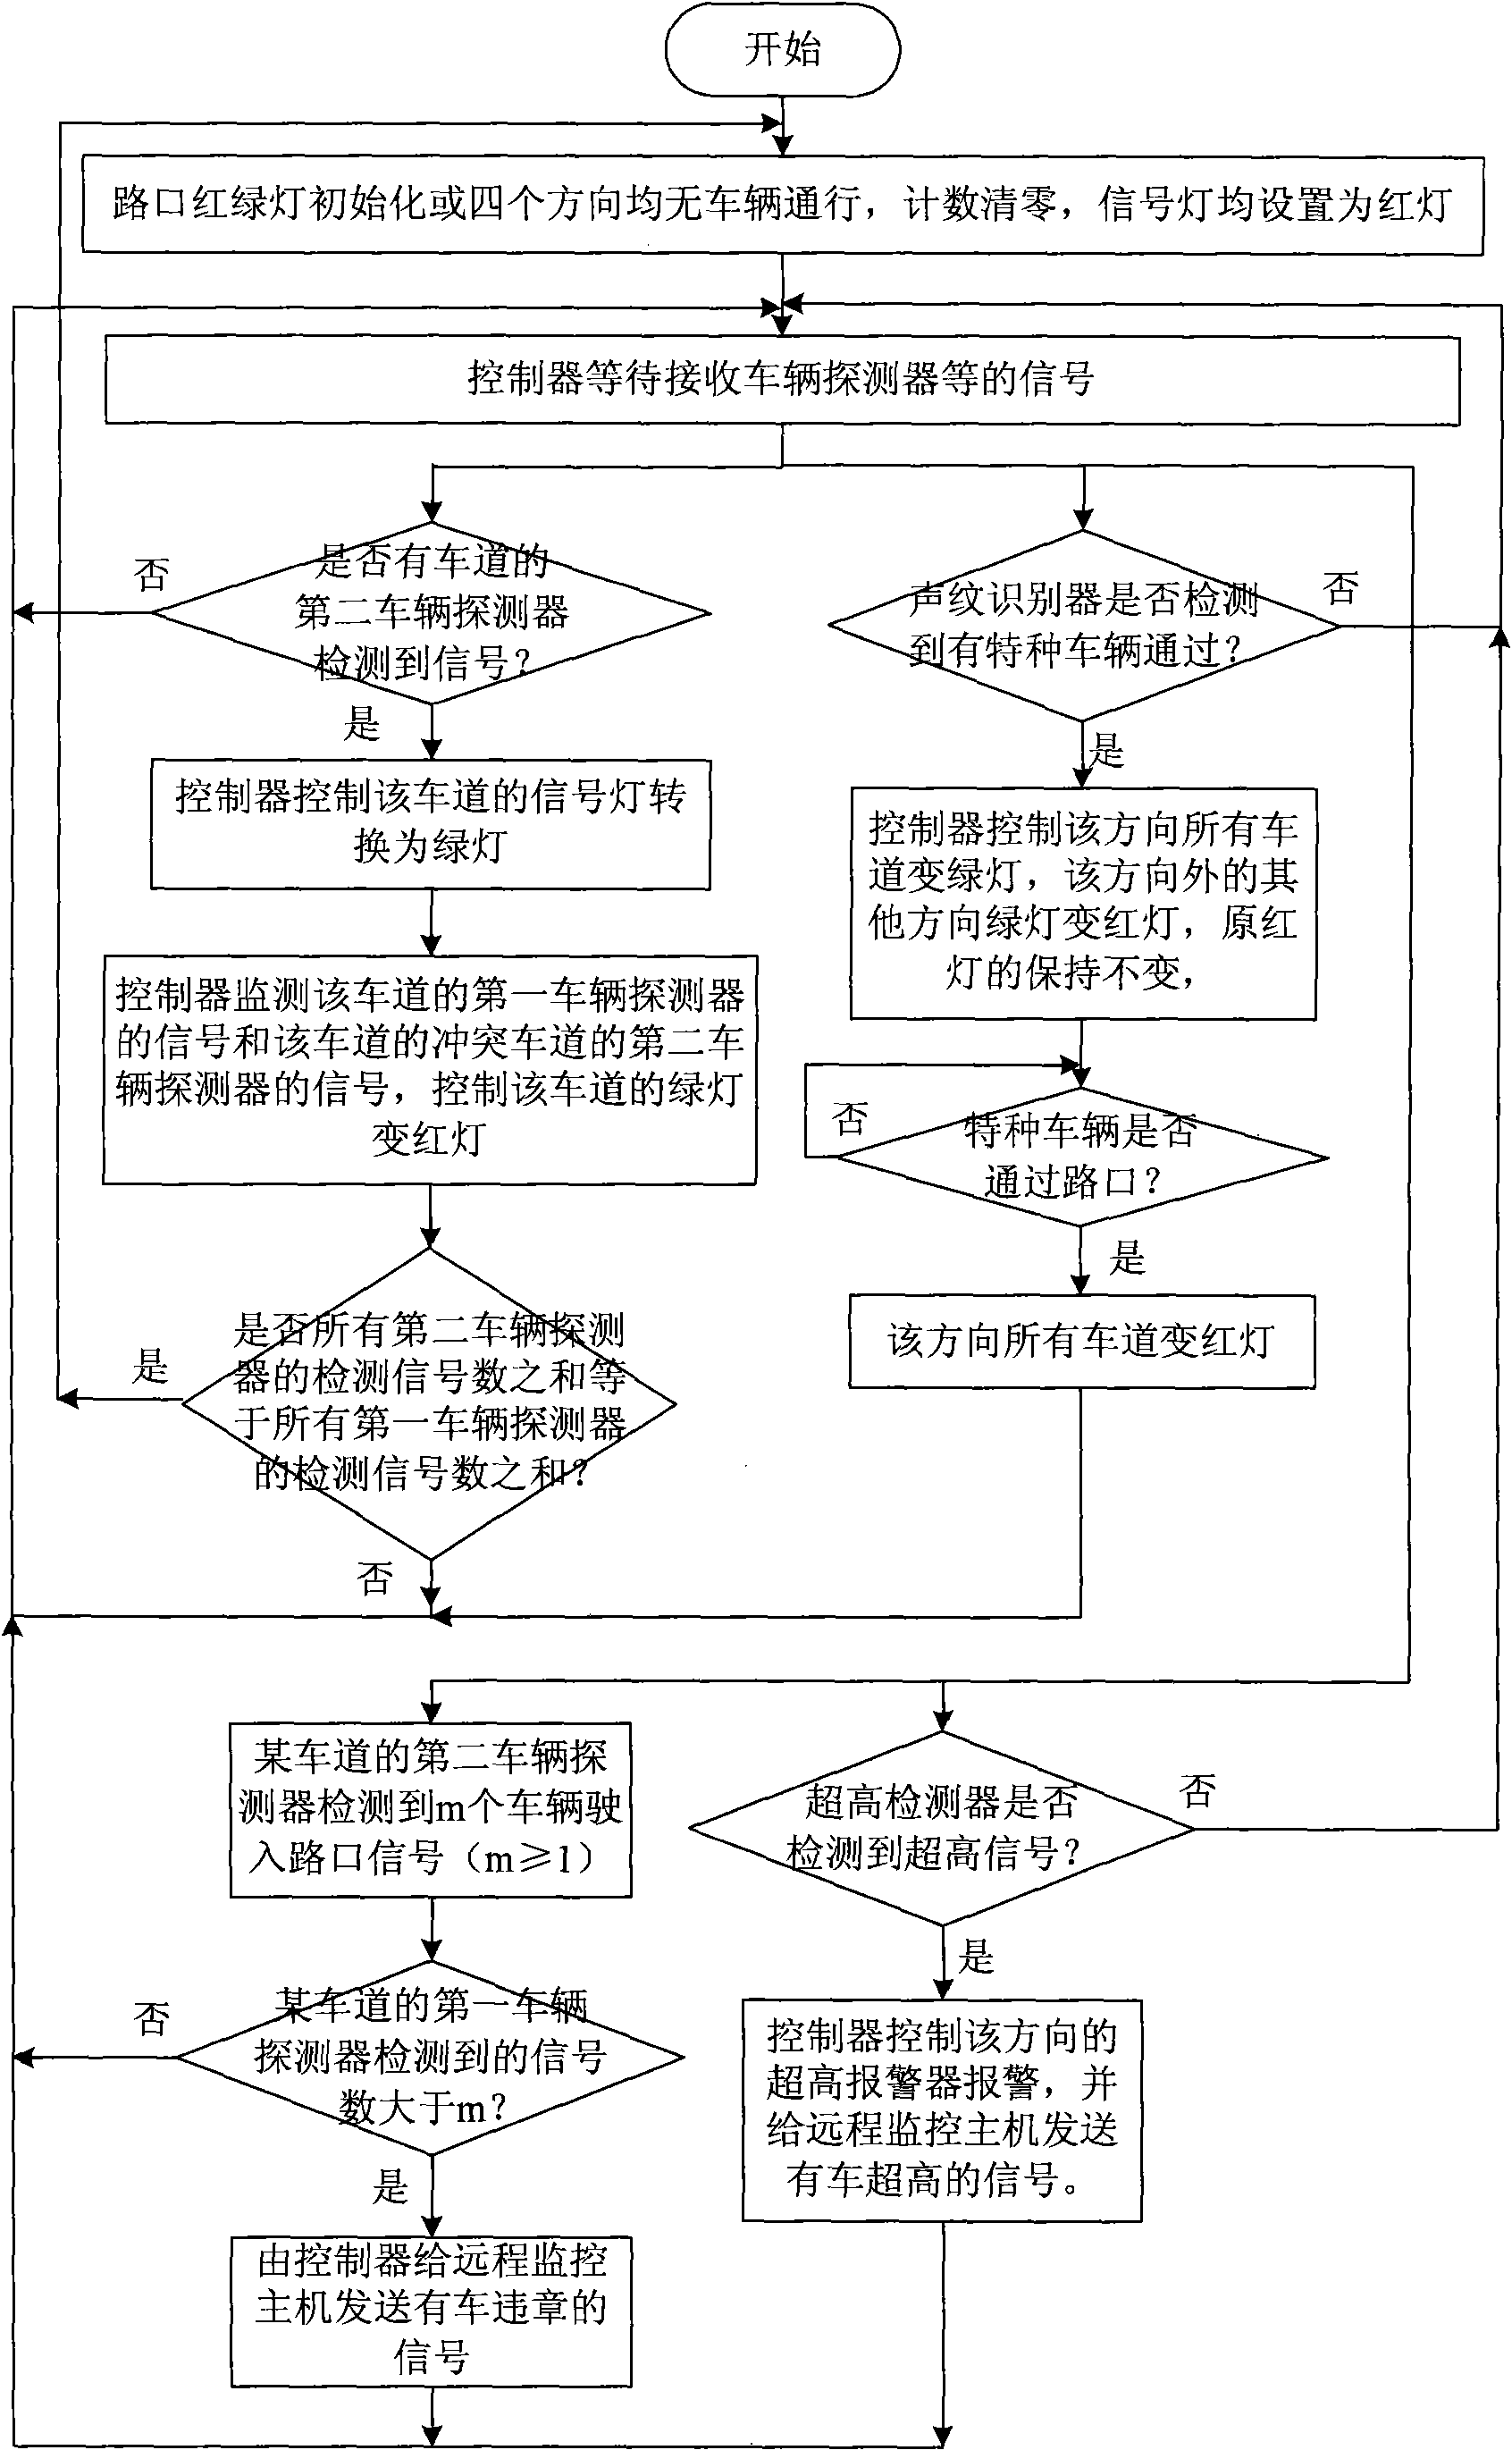 Crossing traffic control system and method